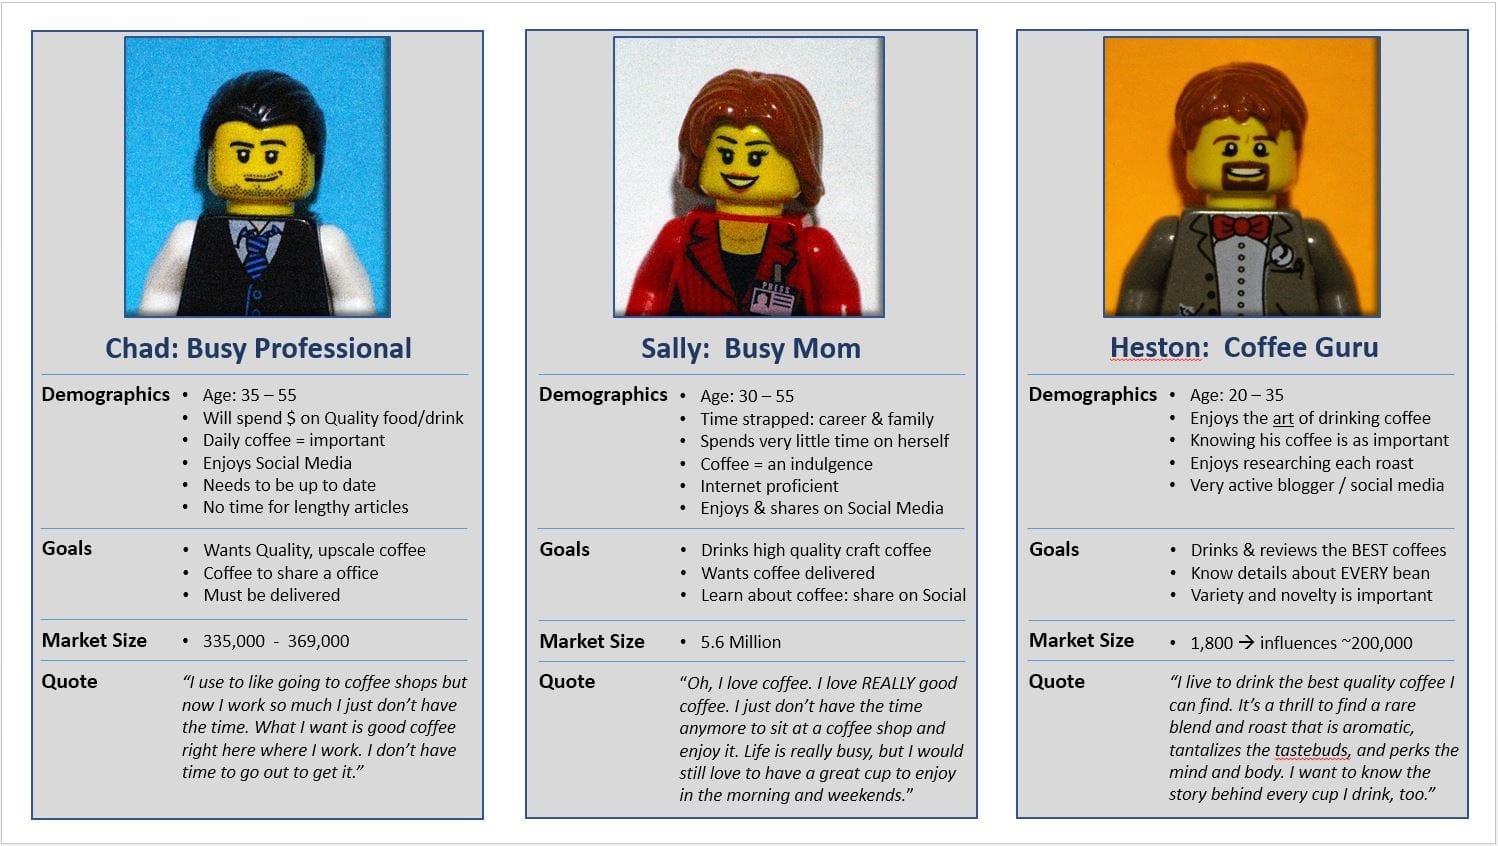 Accurate marketing personas from social media data